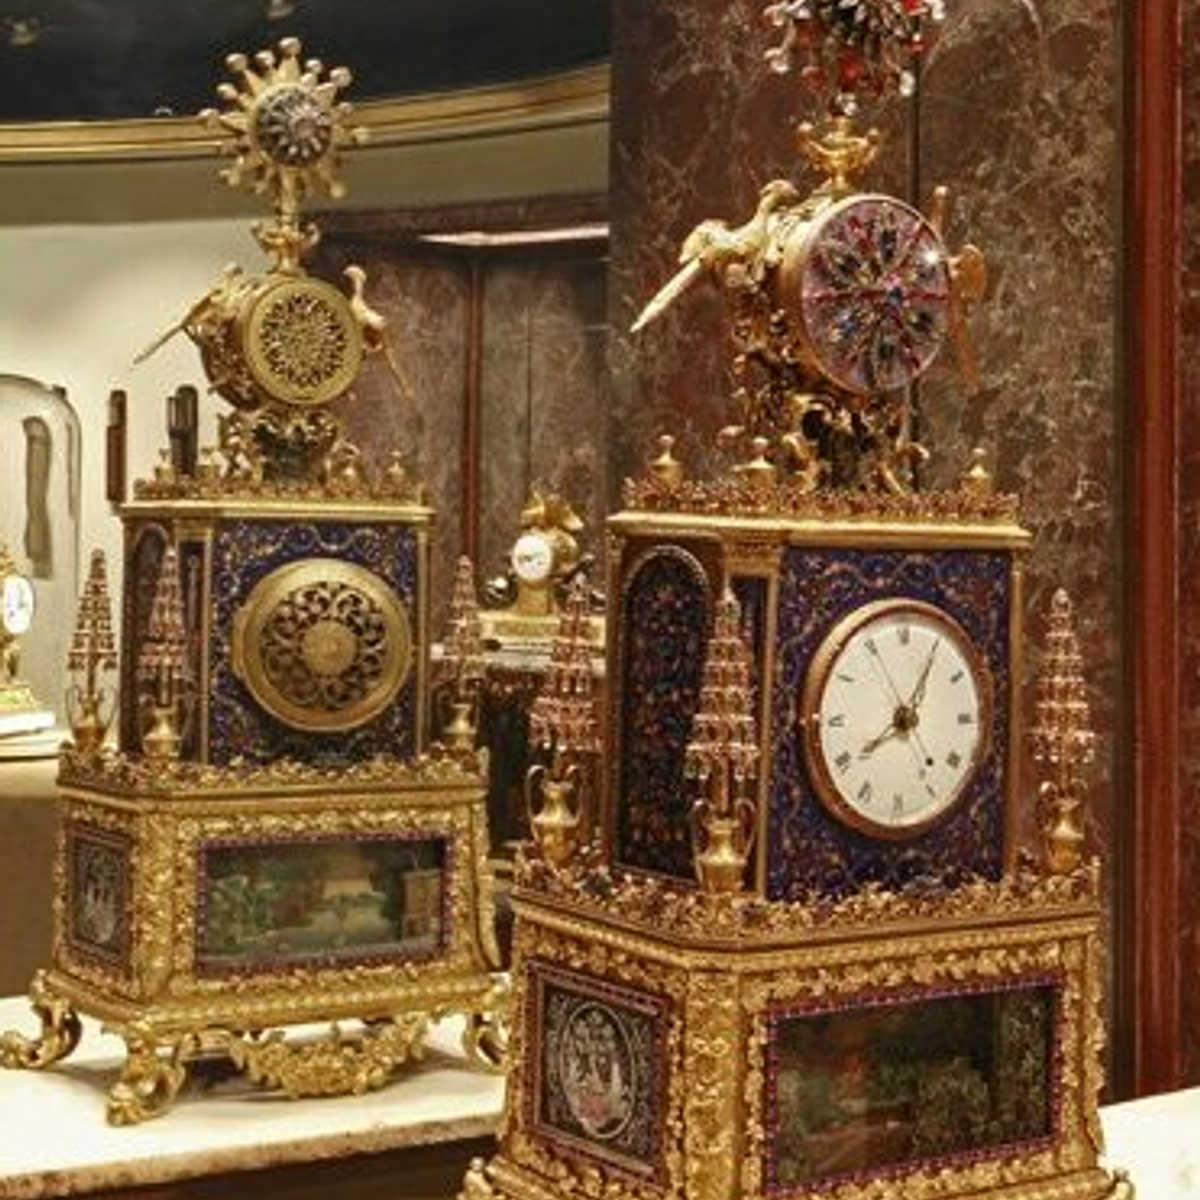 The grassy clock and watch museum